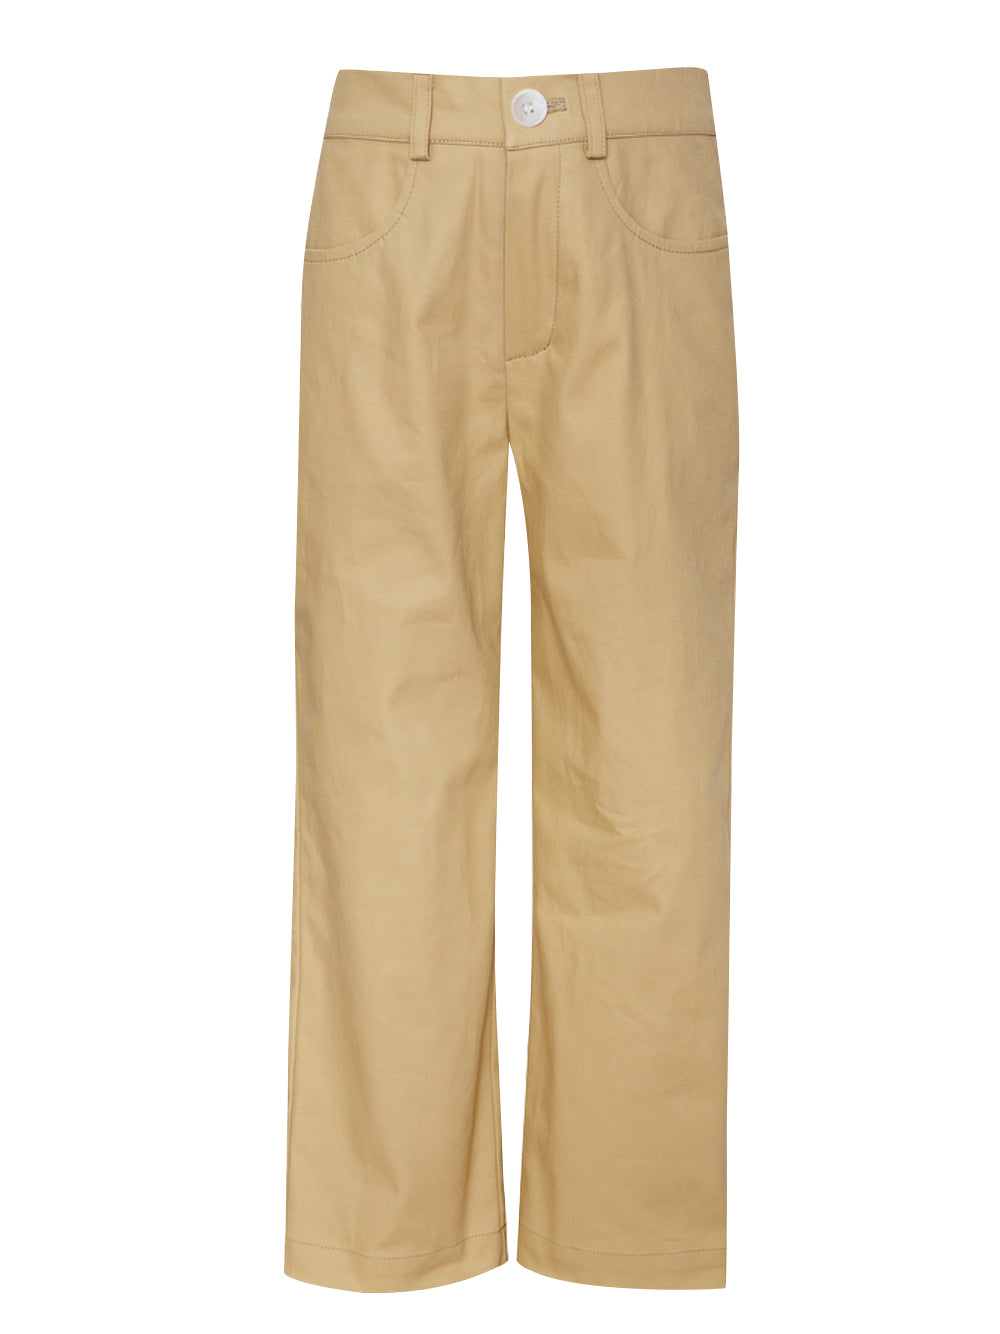 PREORDER: Oasis Trousers